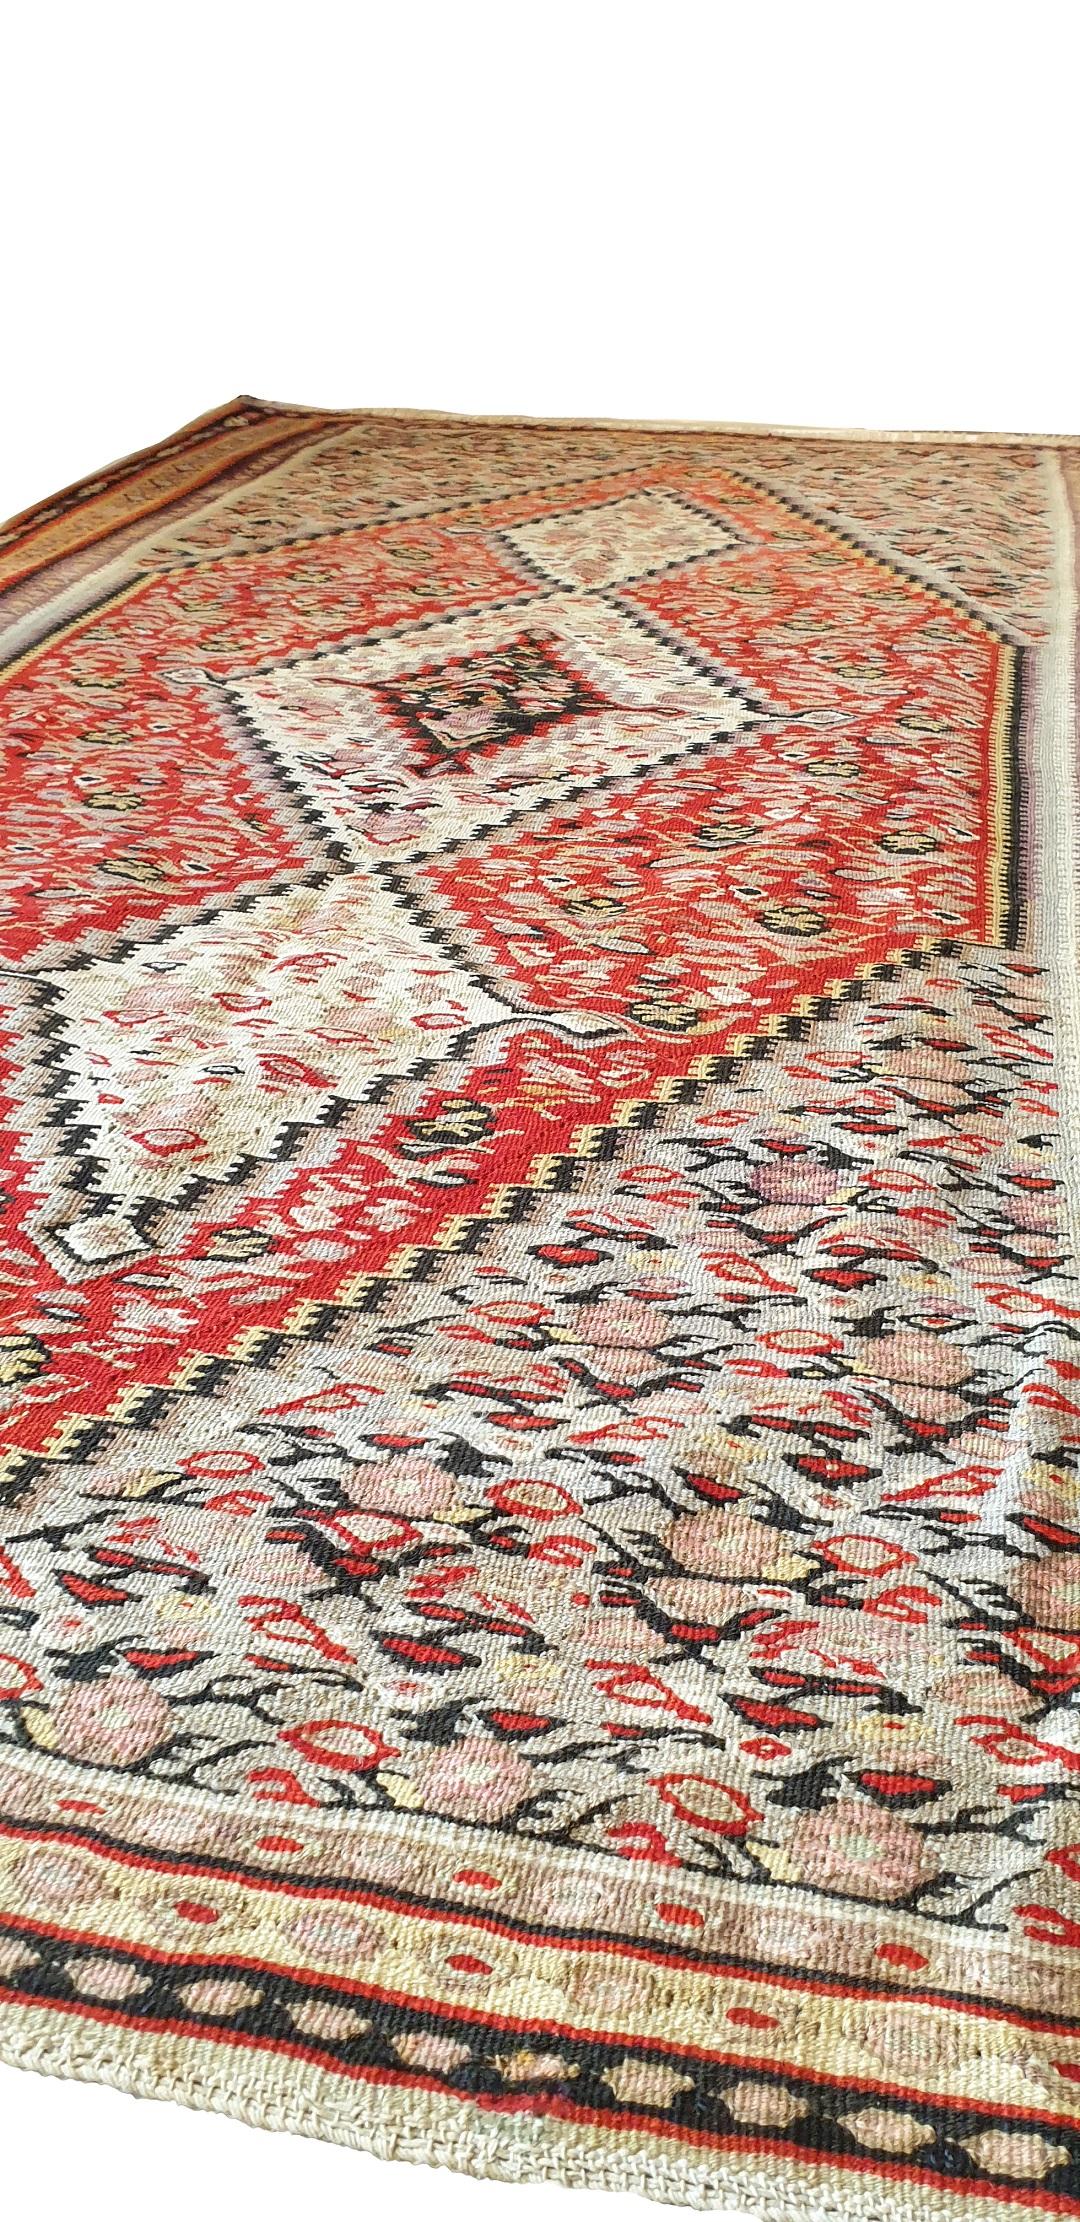 664 - Nice kilim from the end of the 19th century with beautiful fine central medallion patterns, and beautiful pink, orange, yellow, green and dark brown colors, entirely hand-woven with wool woven on a cotton foundation.